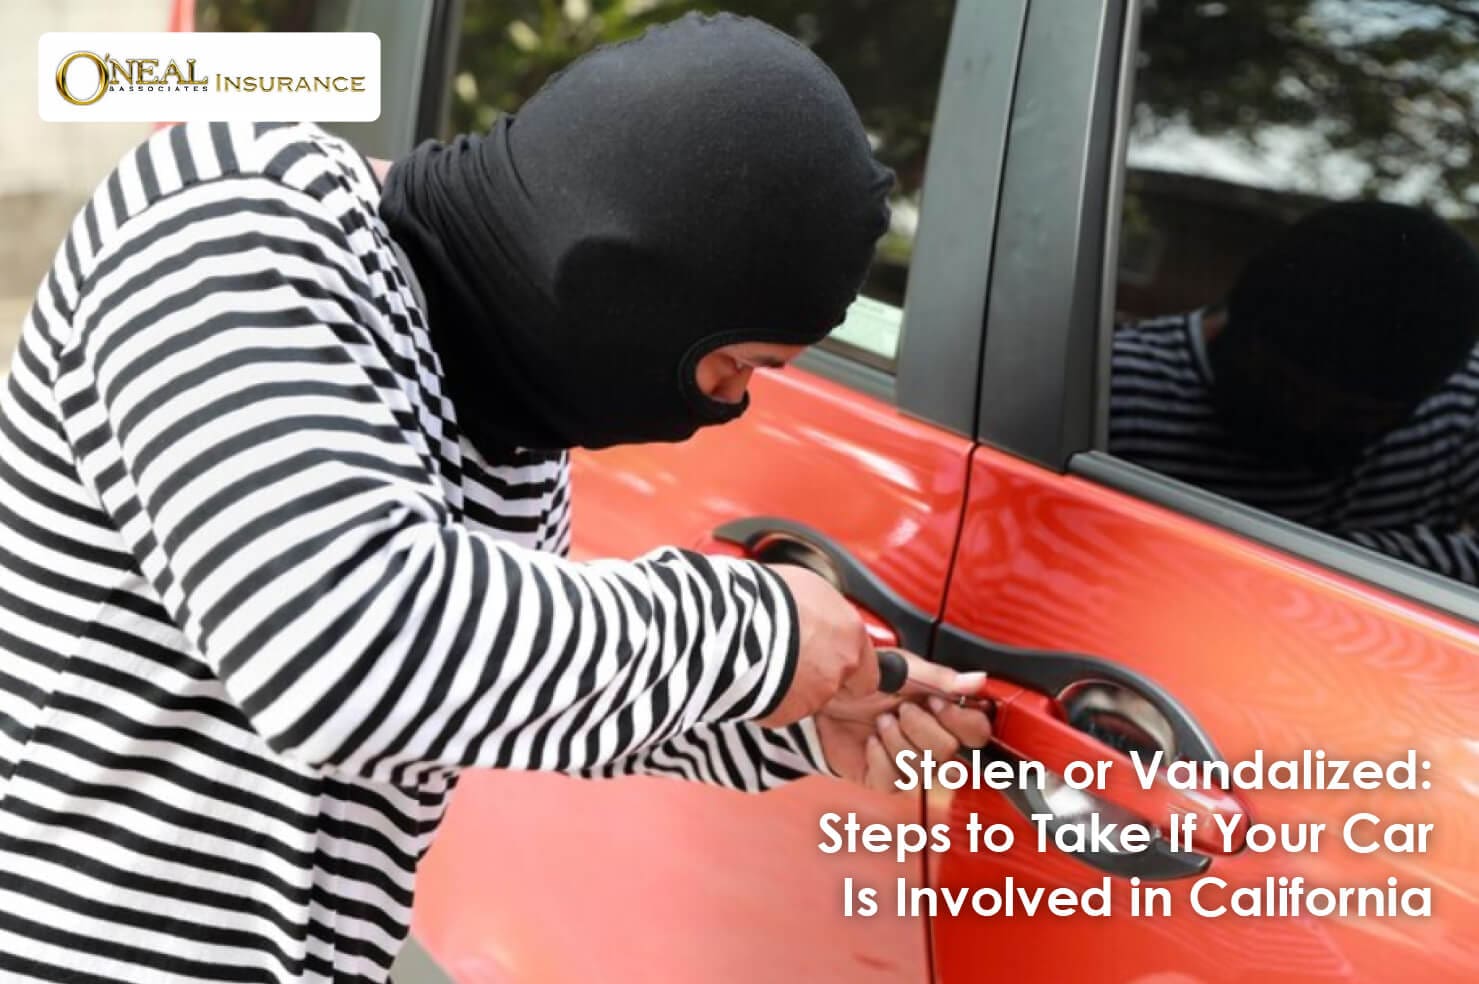 Steps to Take After Car Theft or Vandalism in California